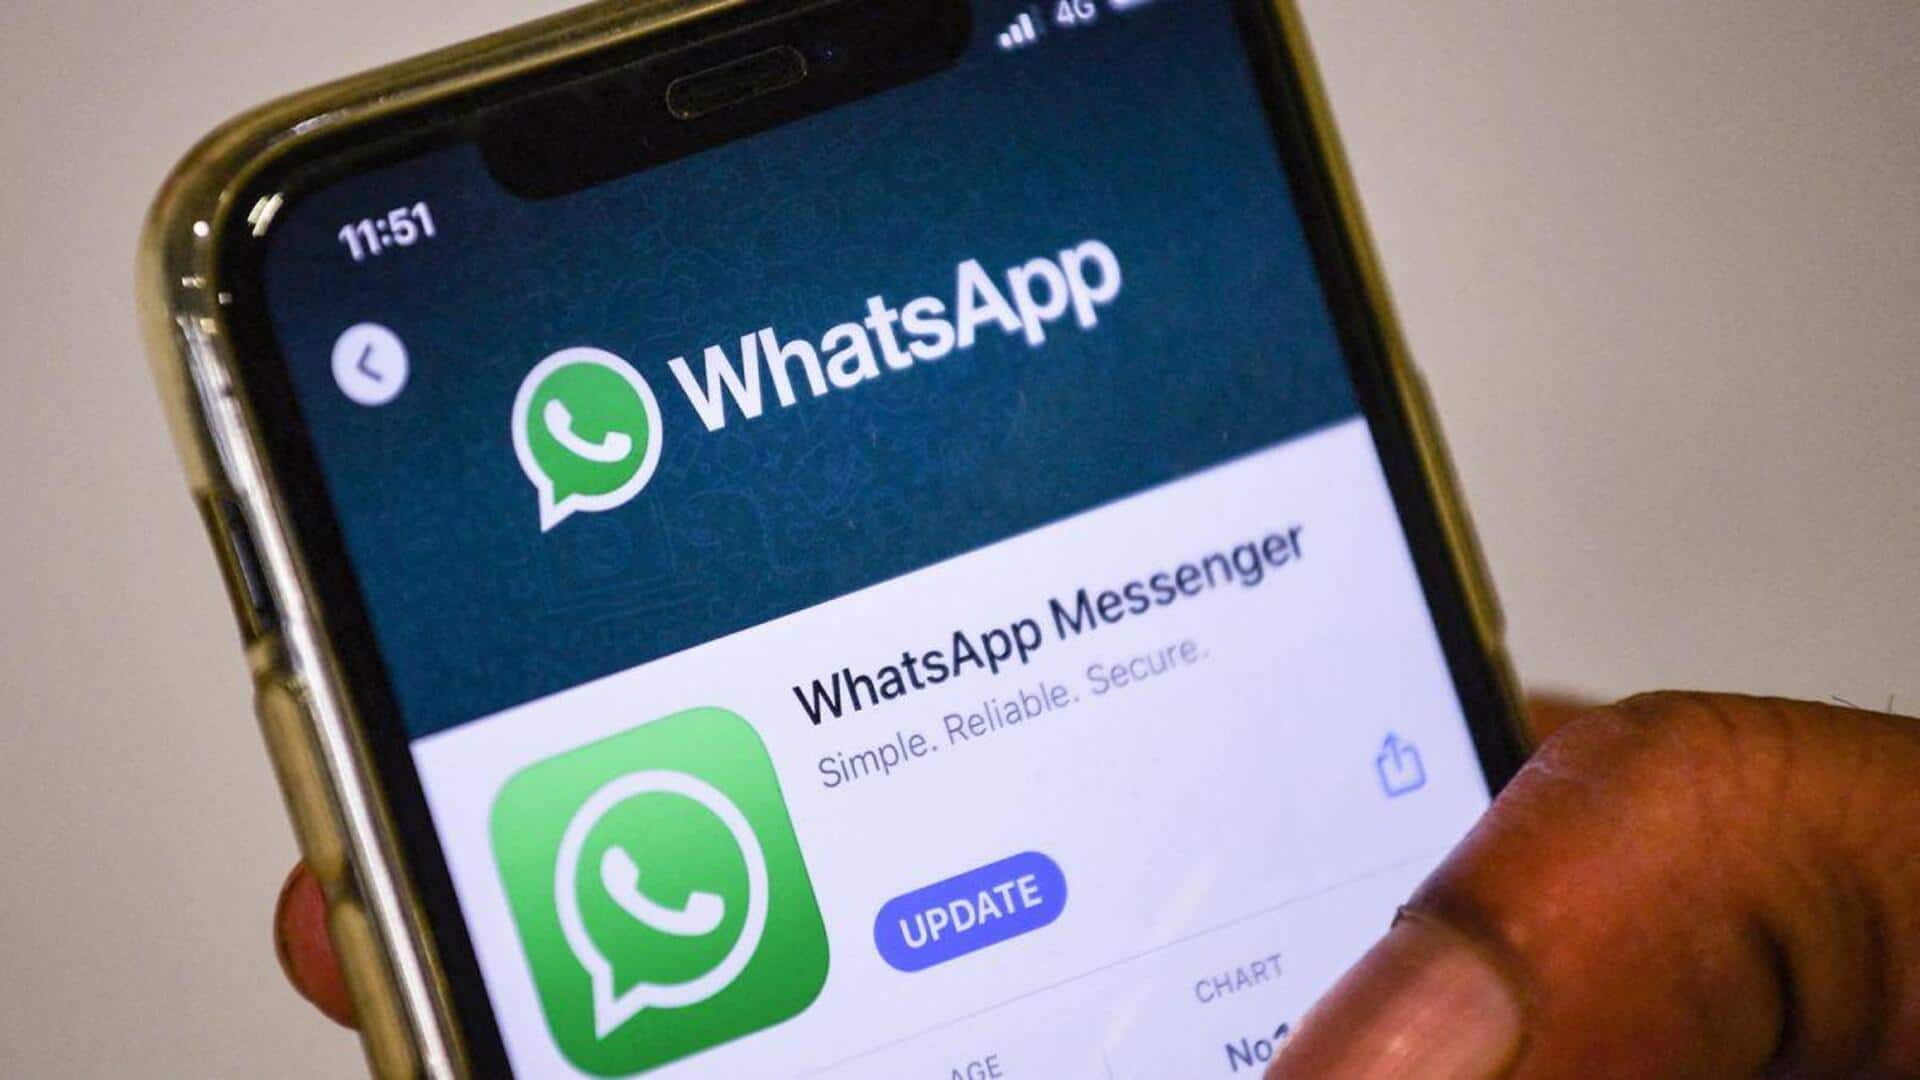 WhatsApp to bring channel report feature on Android devices